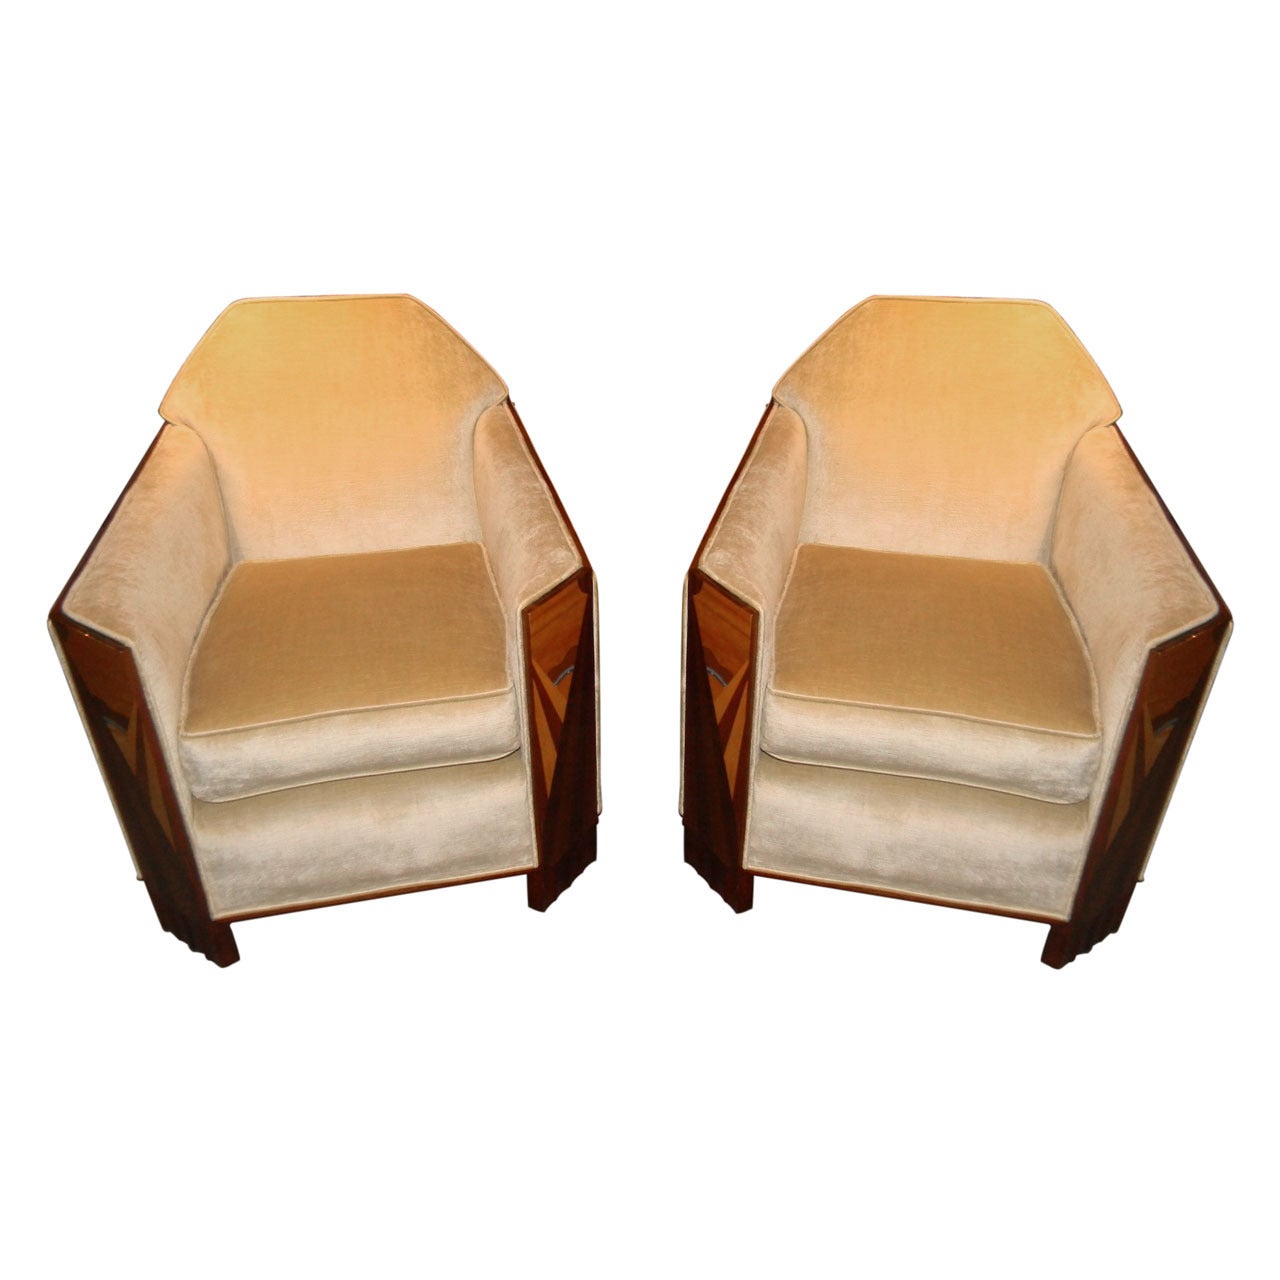 French Art Deco Club Chairs, Cubist with Sunburst Marquetry Panels